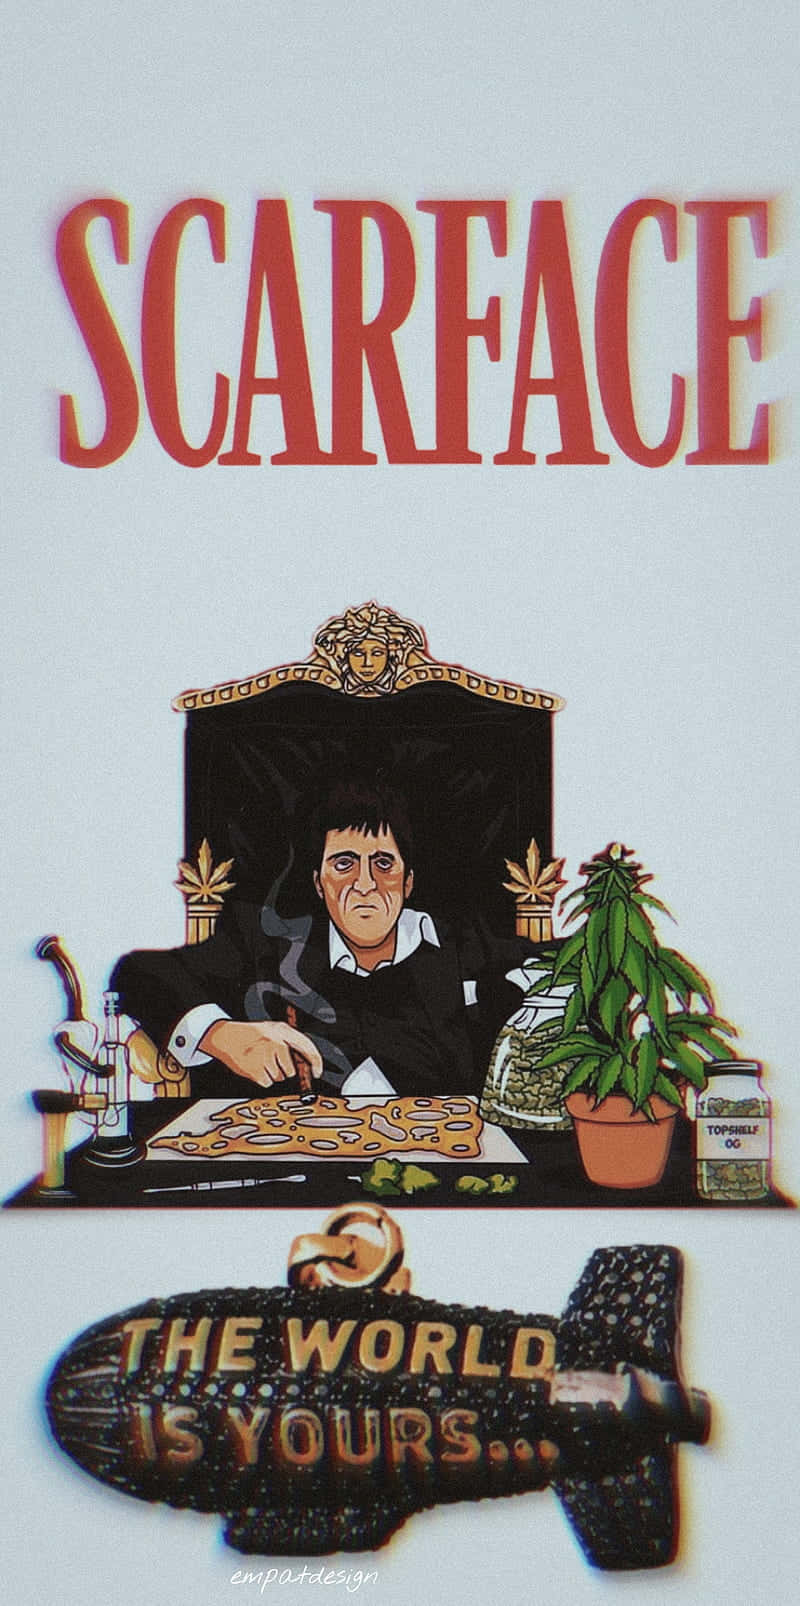 "Experience cinematic quality on your Iphone with Scarface" Wallpaper